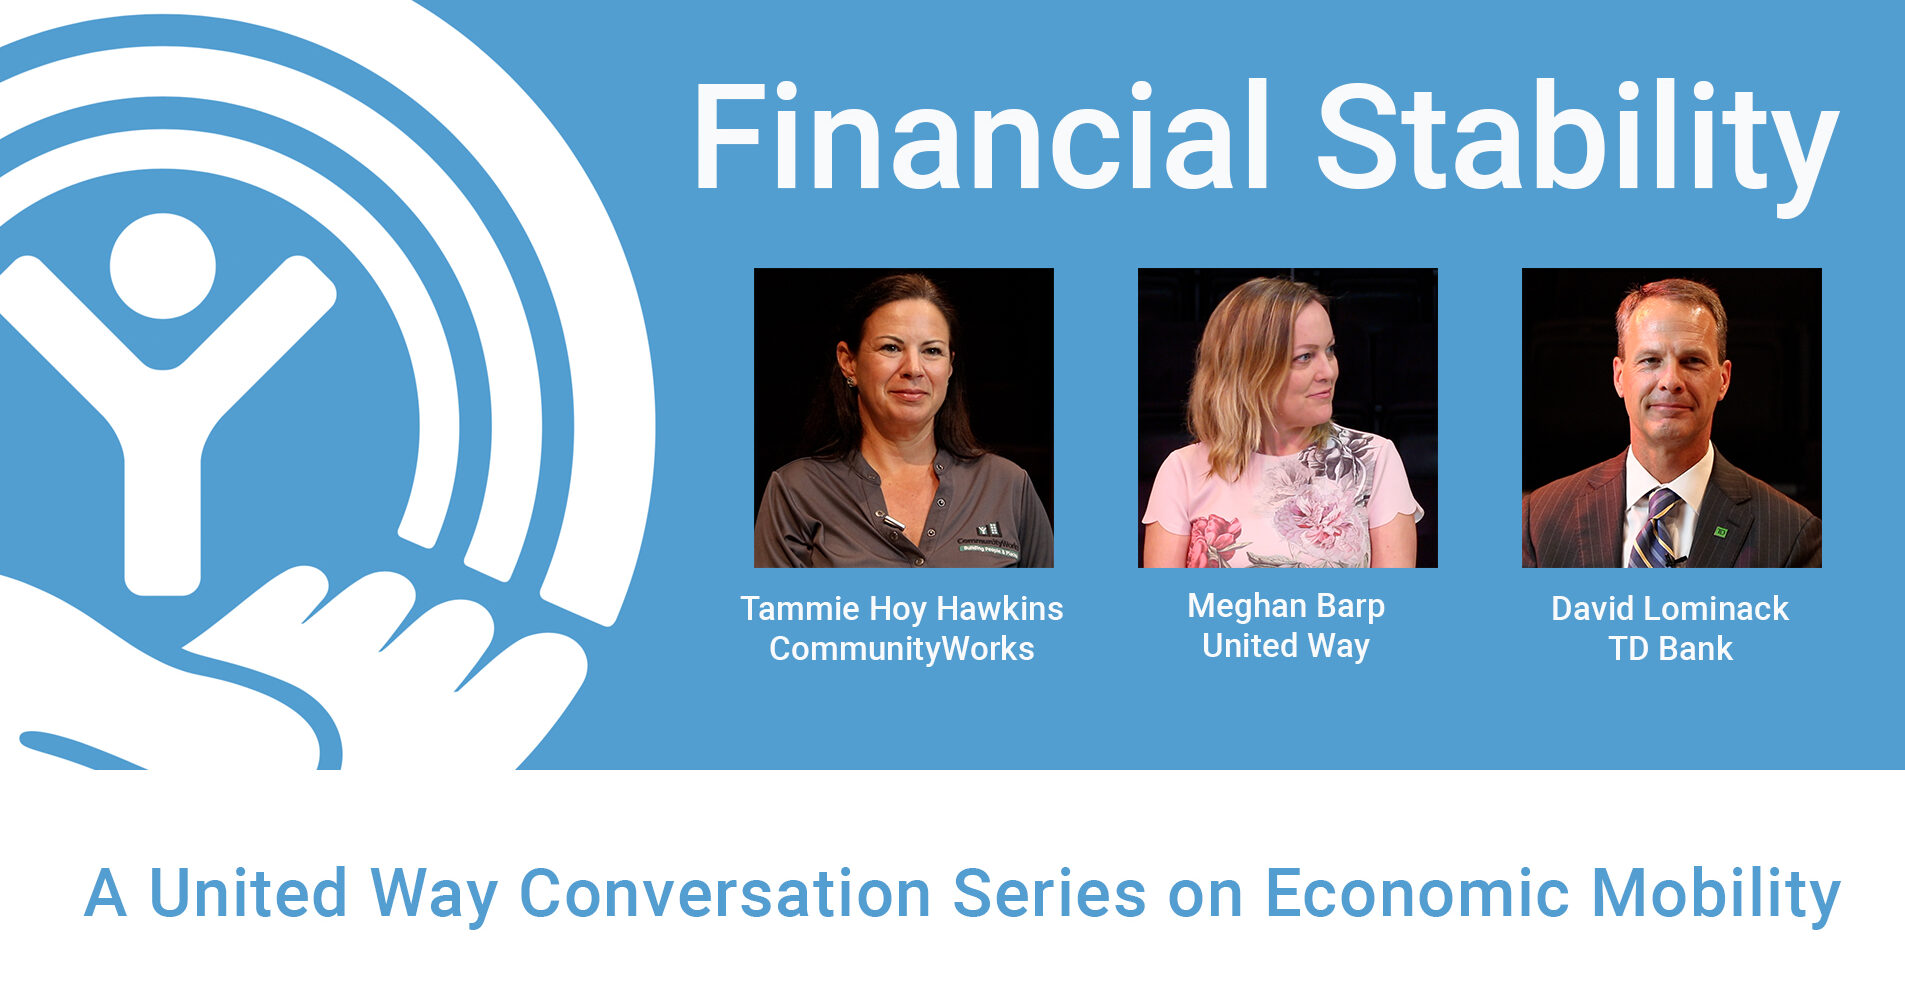 United Way Conversation Series: Financial Stability and the Journey to Economic Mobility